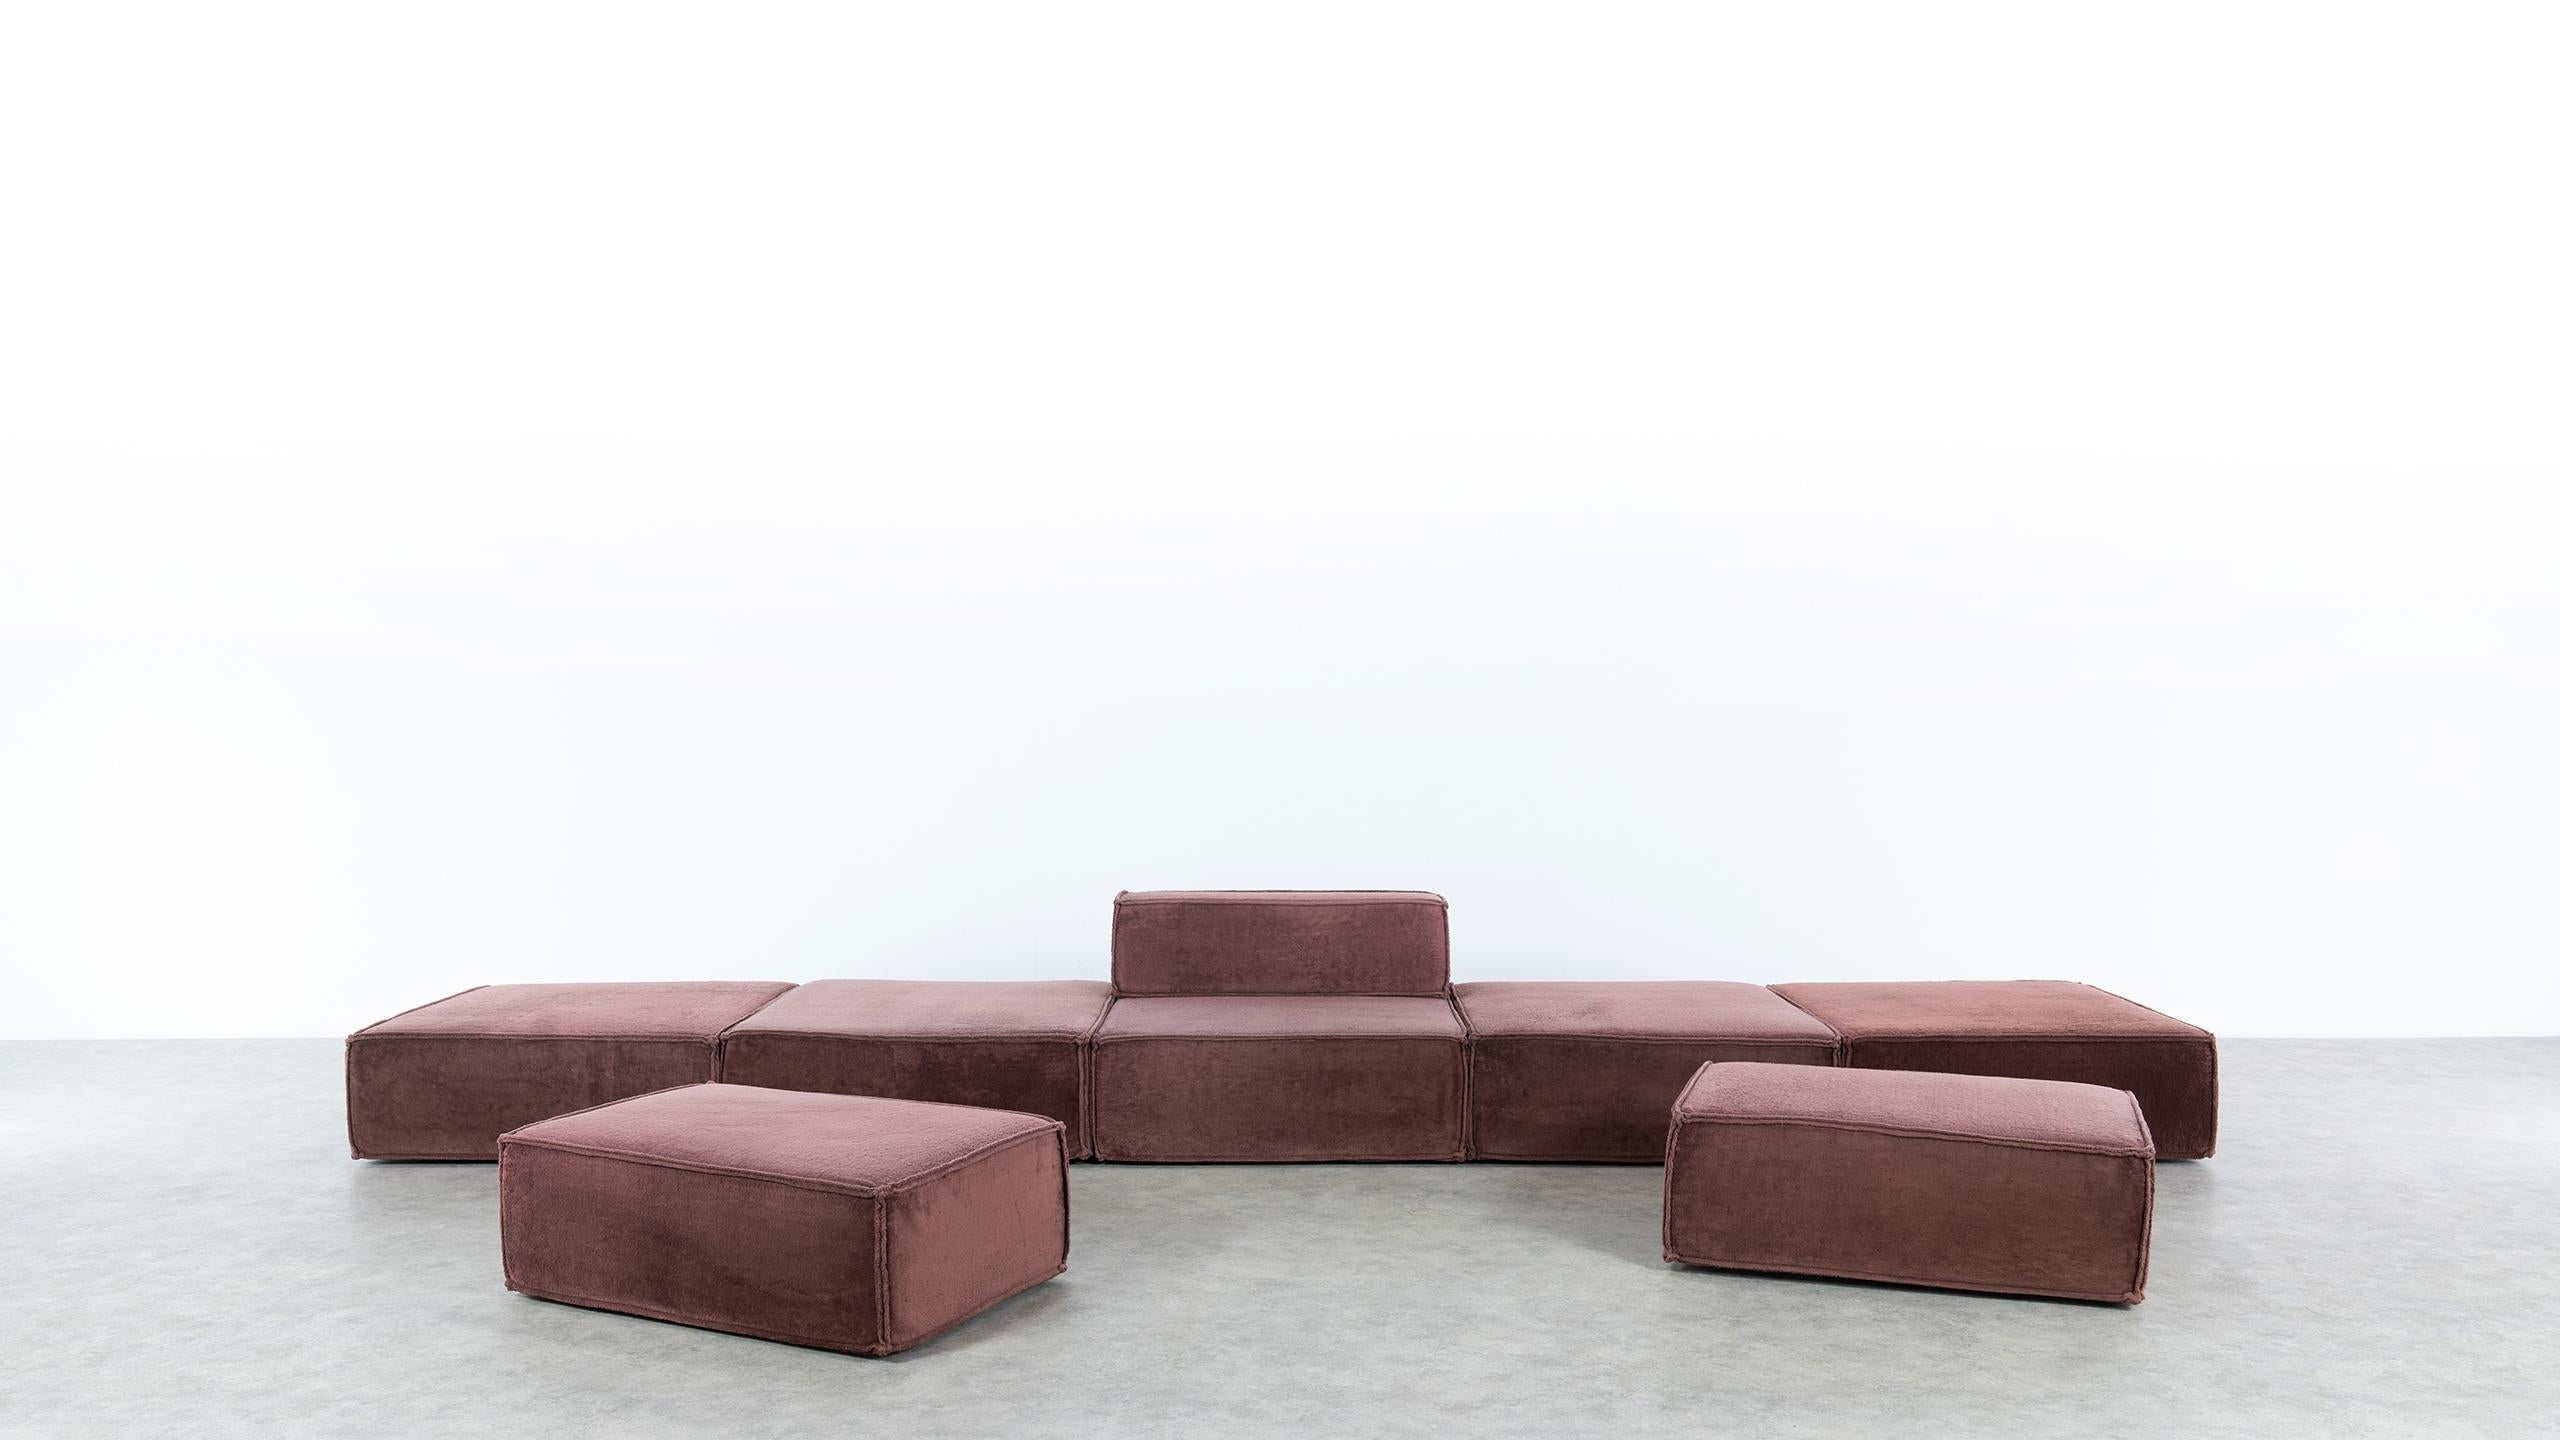 COR Trio Modular Sofa, Giant Landscape in Brown, 1972 by Team Form AG, Swiss 2